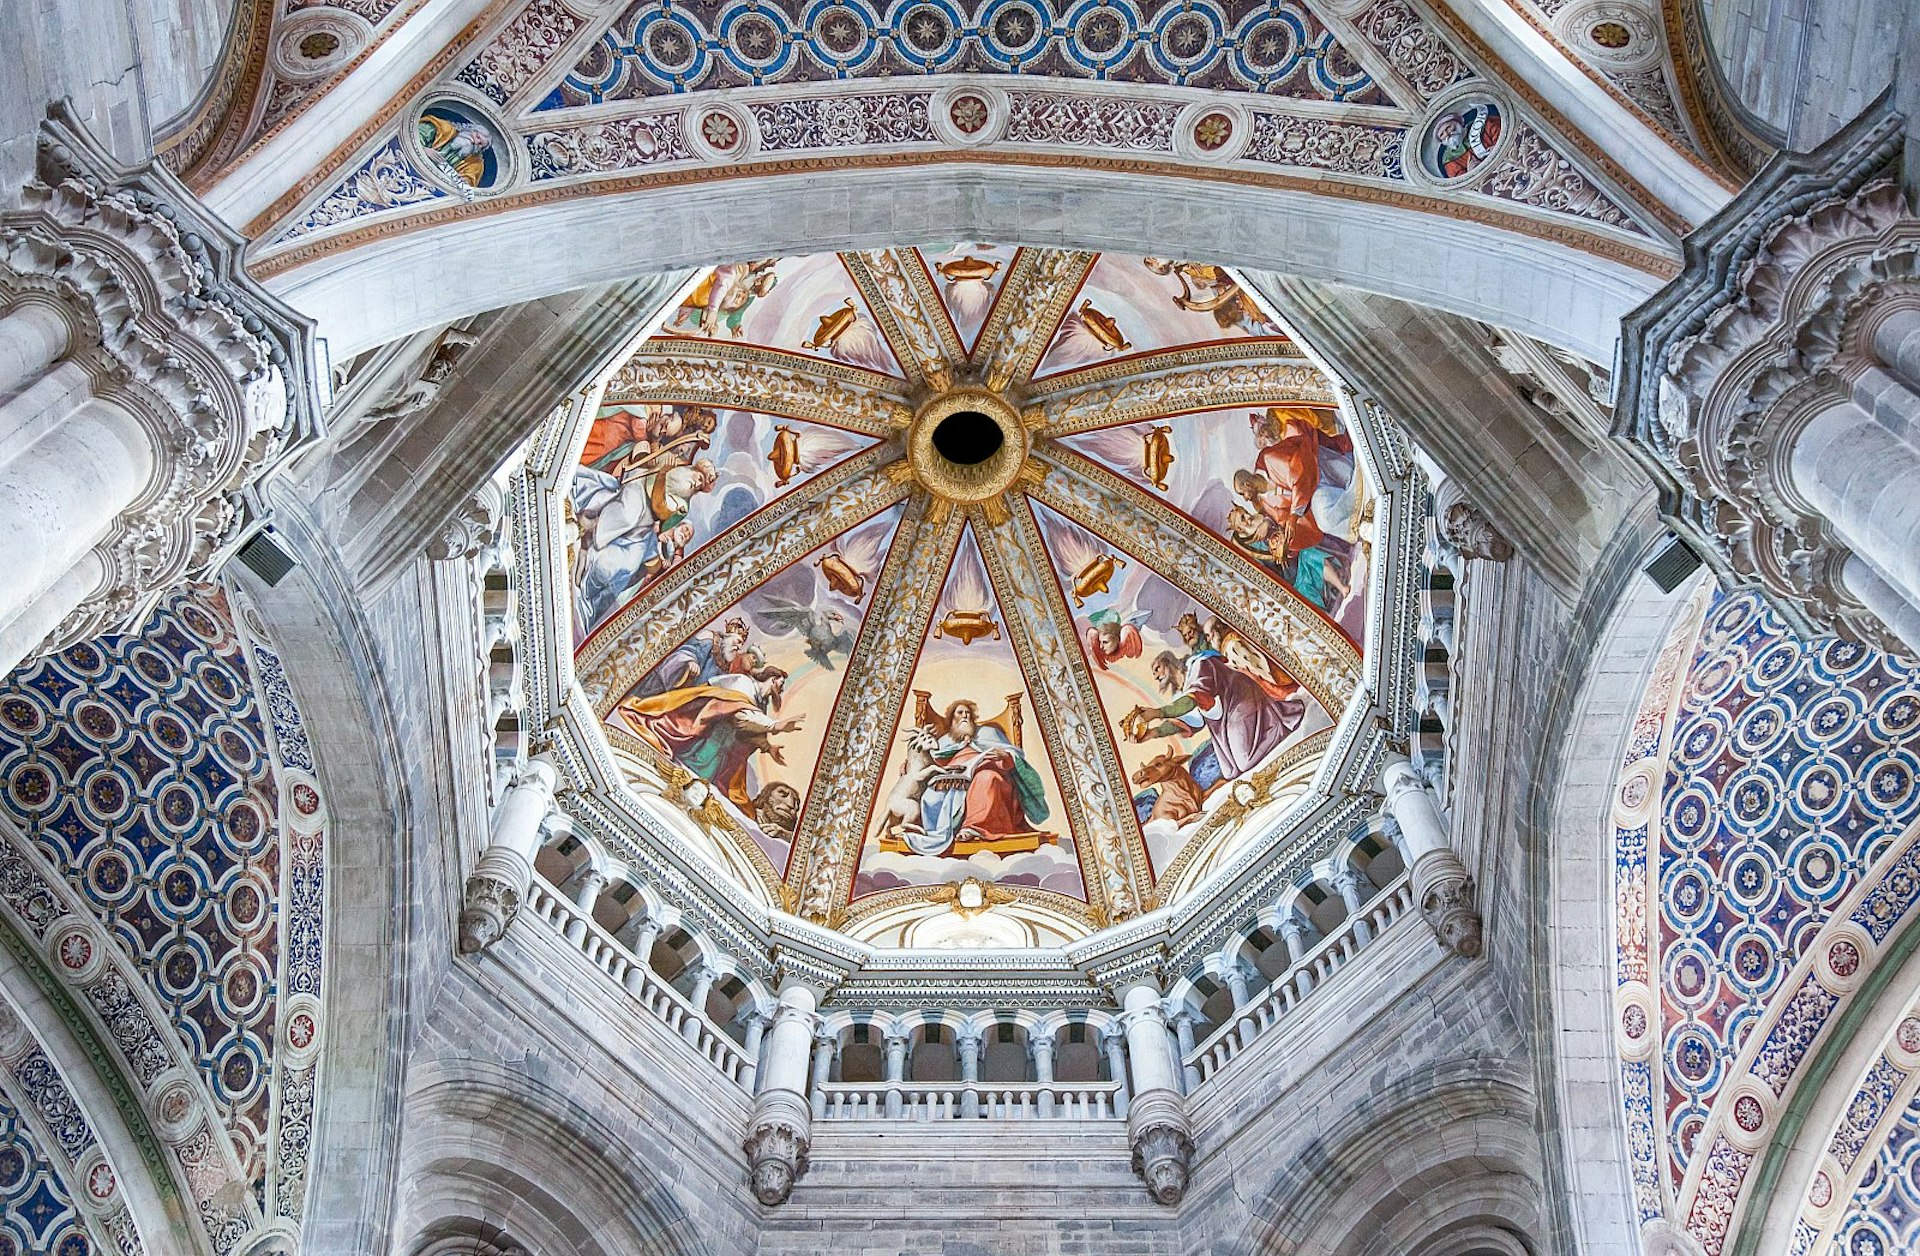 The ceiling of the main nave of the Certosa di Pavia; it is domed and vaulted, and covered in detailed and colourful frescoes and tilework.